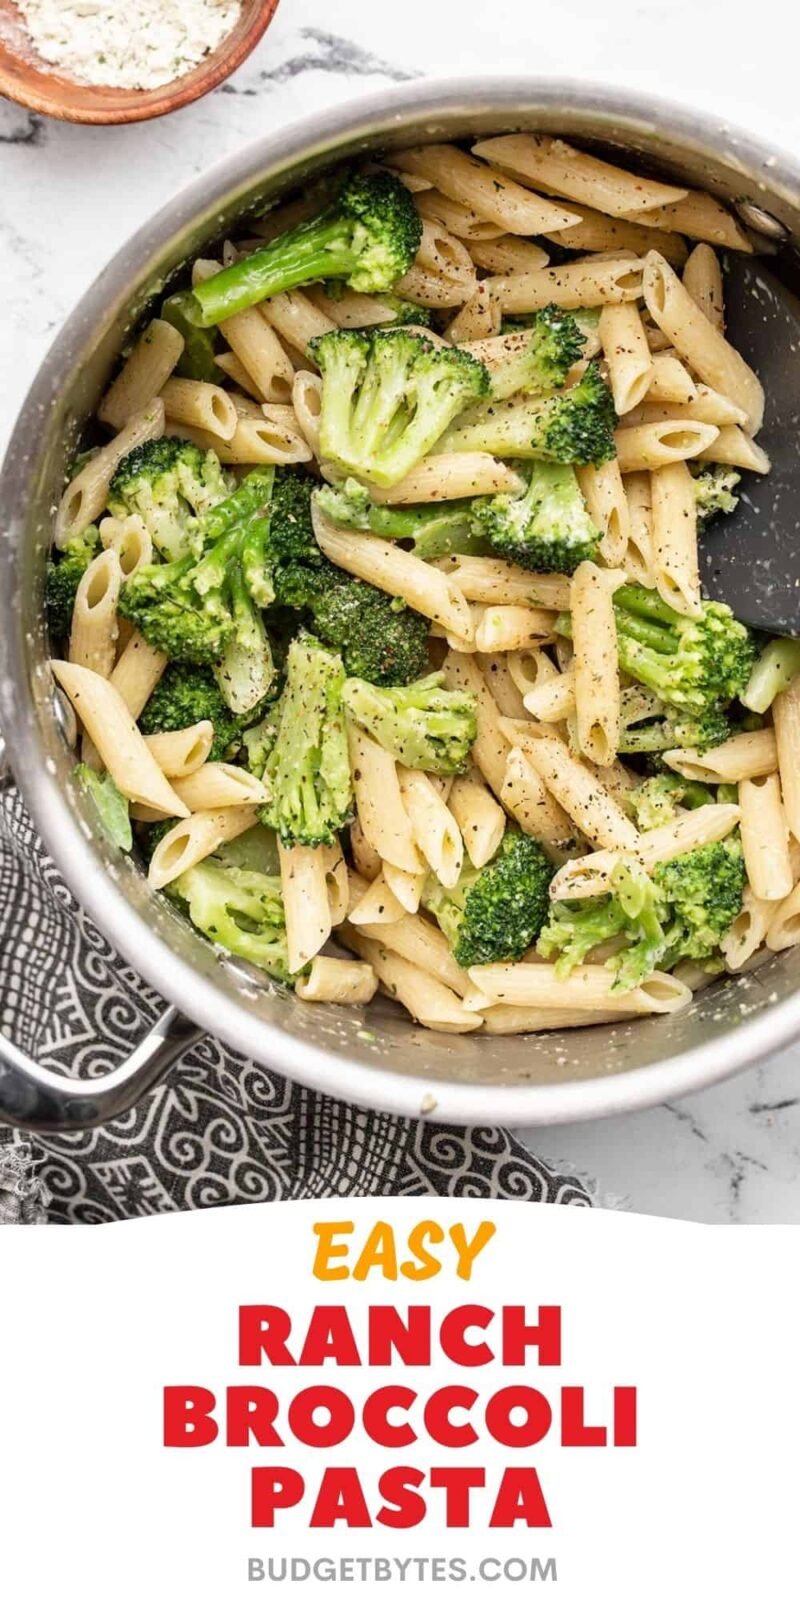 Overhead view of ranch broccoli pasta in the pot, title text at the bottom